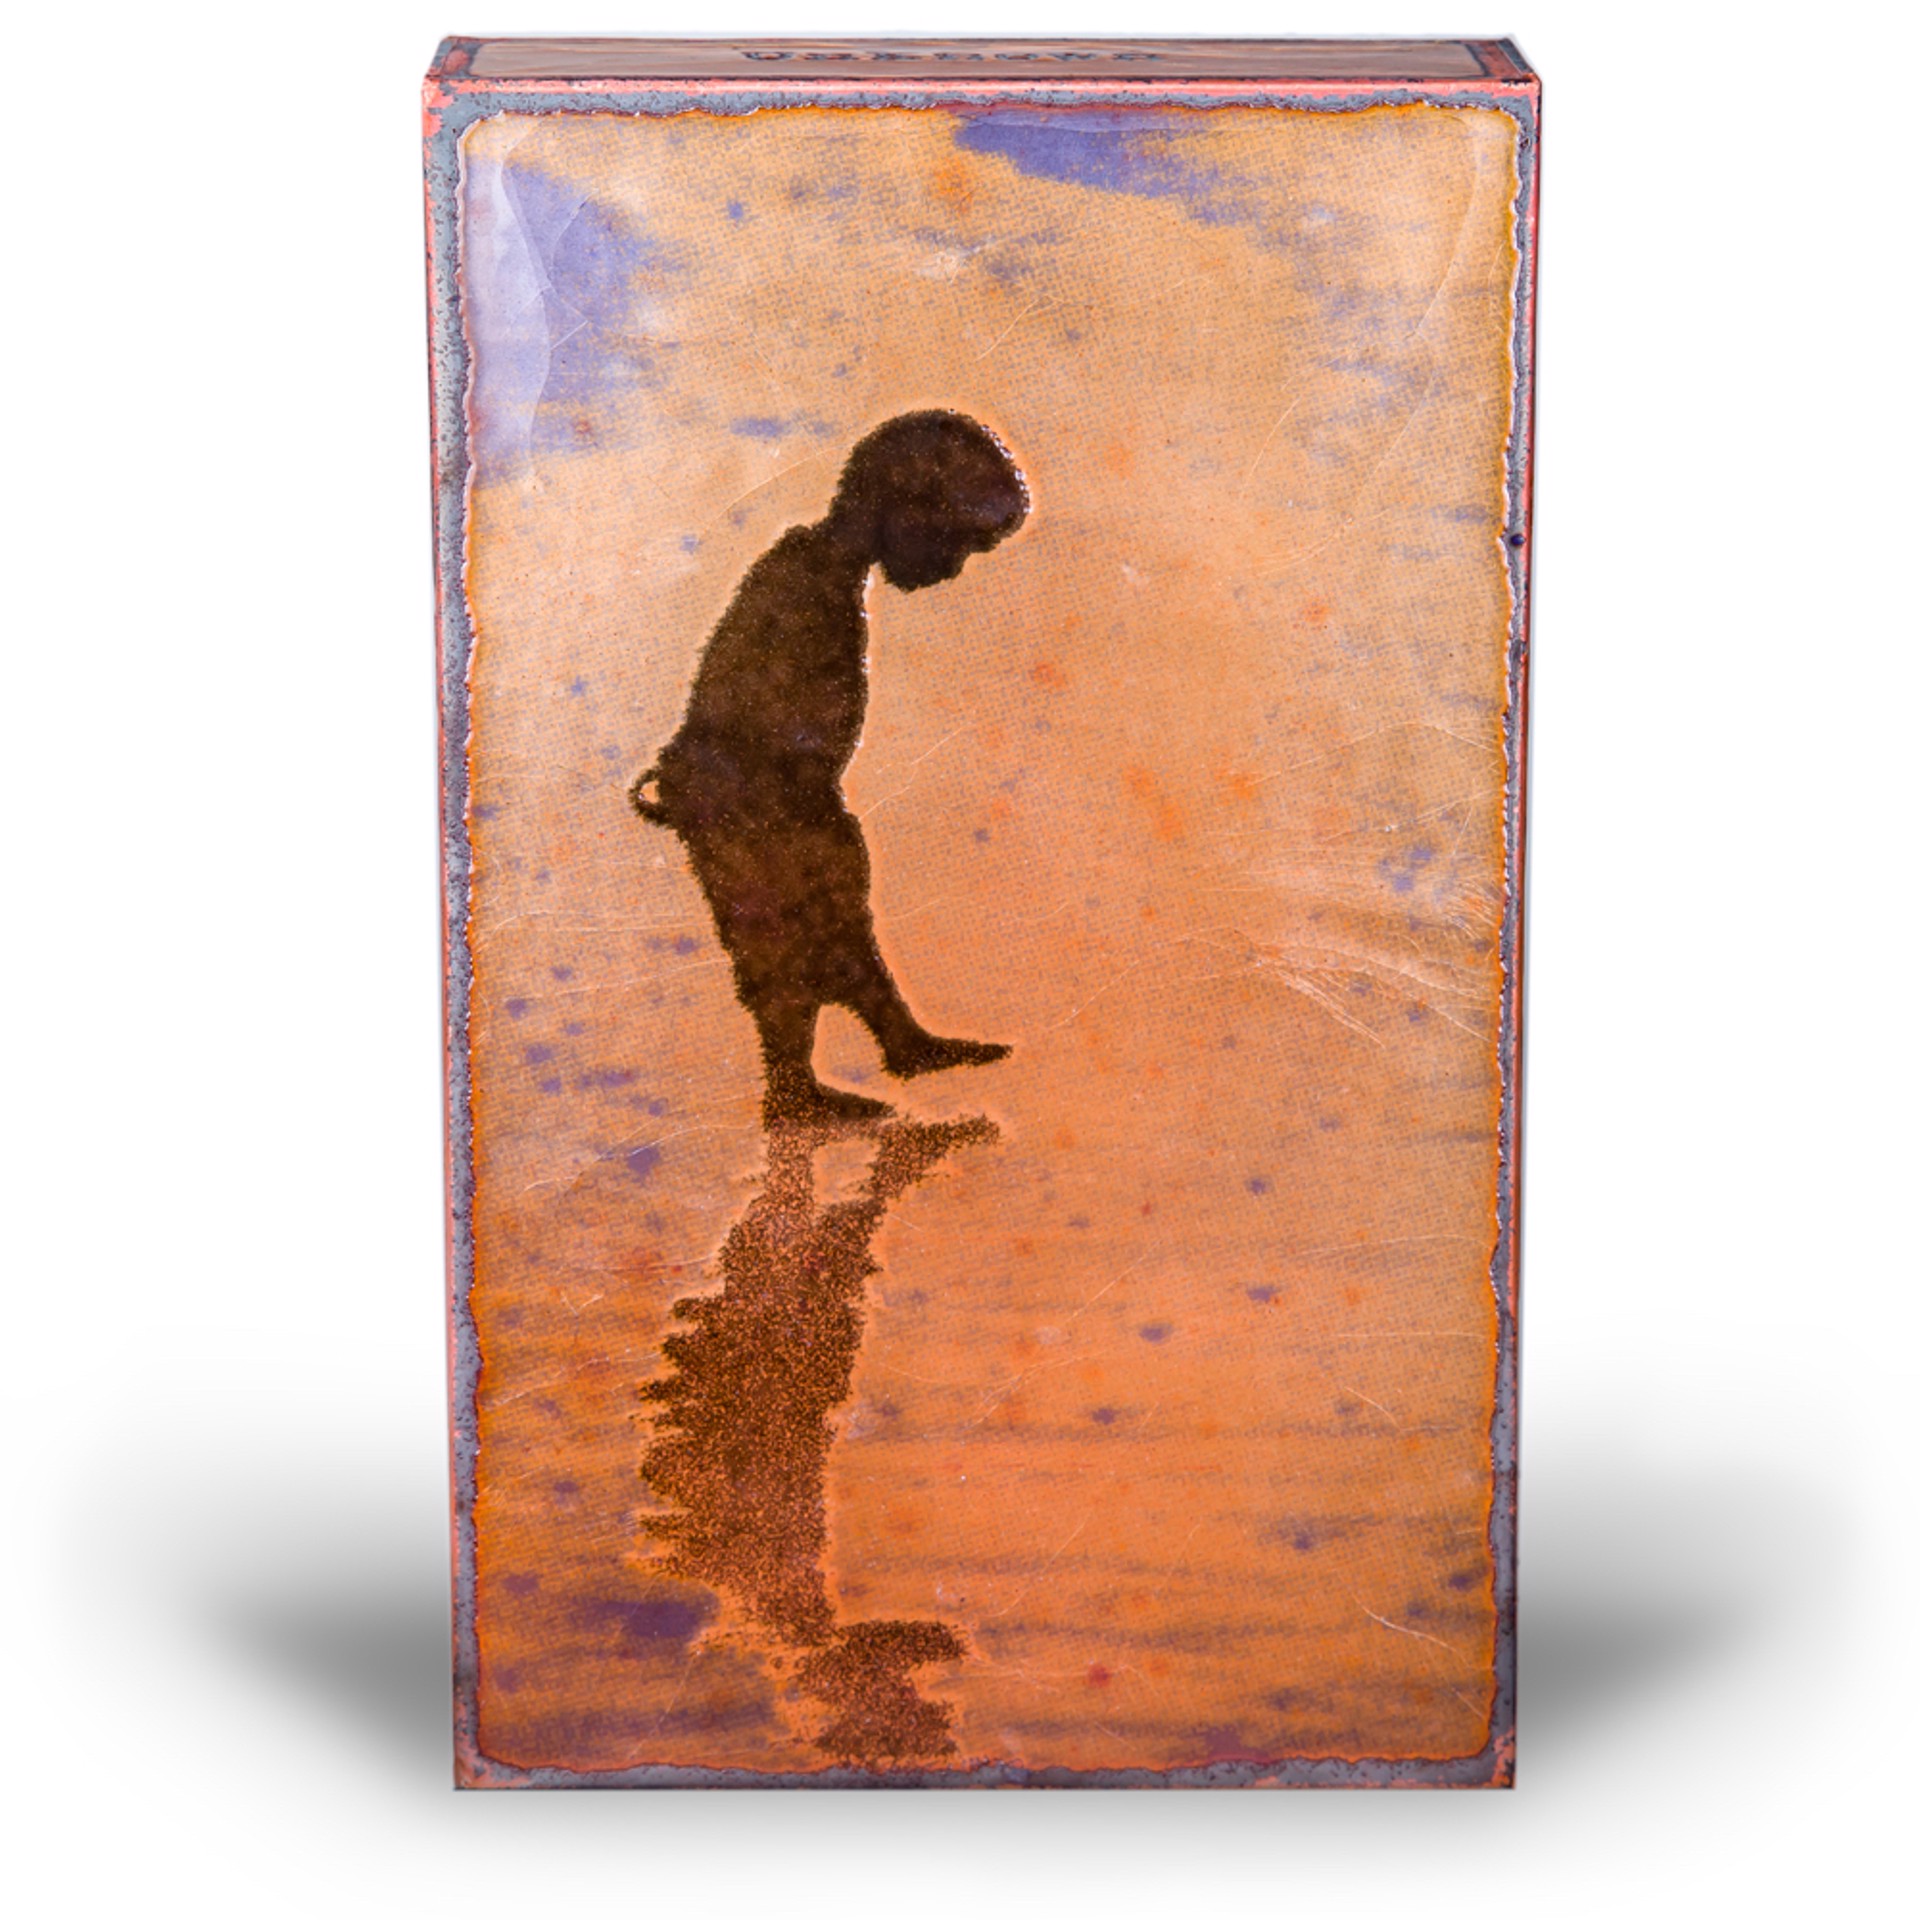 A Houston Llew Glass Fired To Copper Spiritile #153 Featuring A Child Silhouette And A Quote By Unknown, Available At Gallery Wild